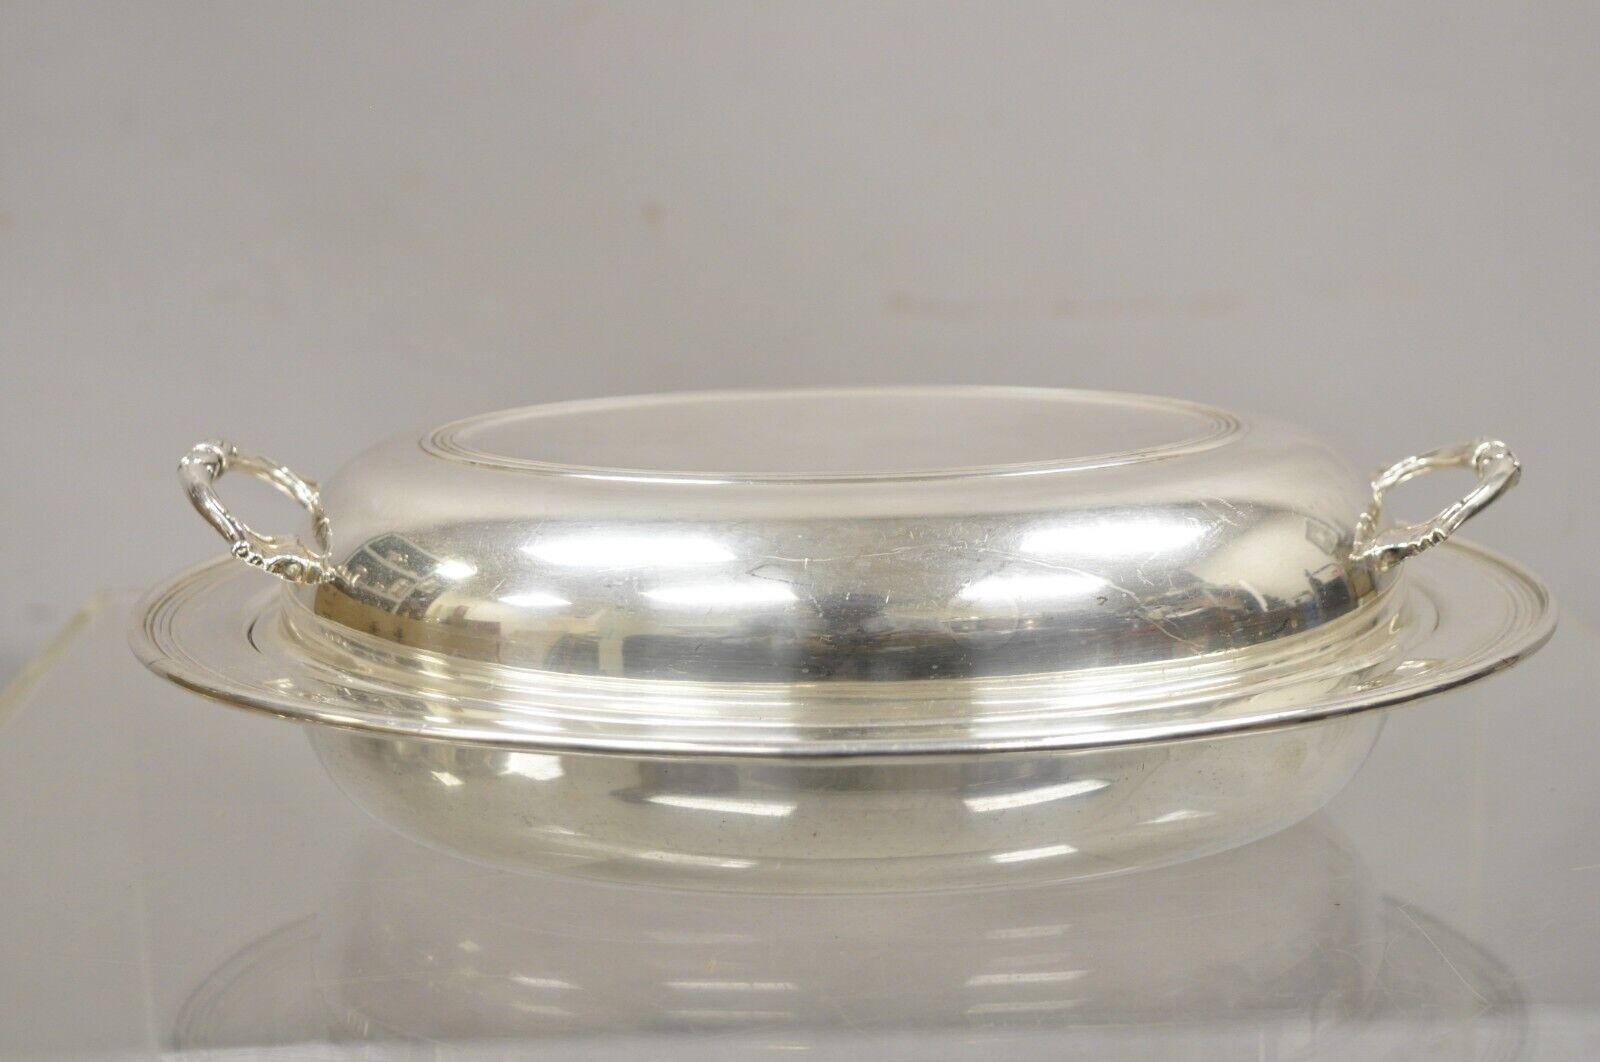 Vintage Sheffield Silver Co USA Silver Plated Lidded Vegetable Serving Dish. Circa 1970s. Measurements:  3